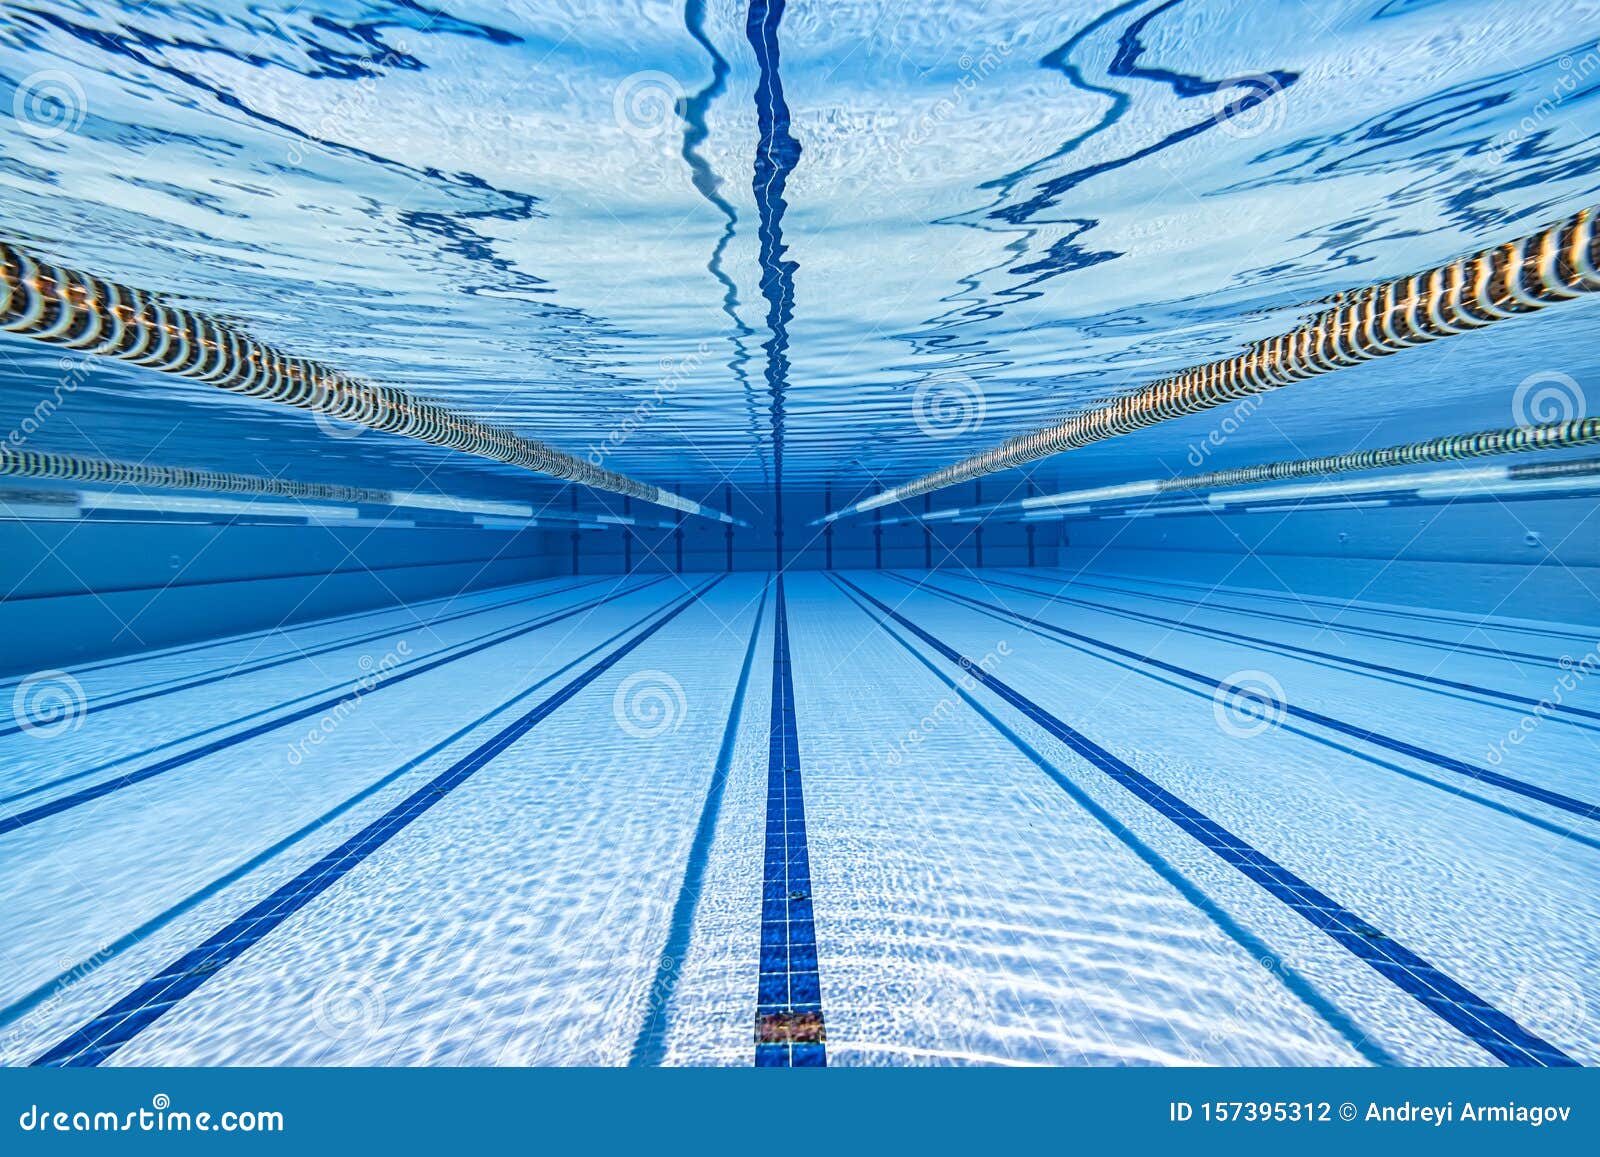 olympic swimming pool under water background